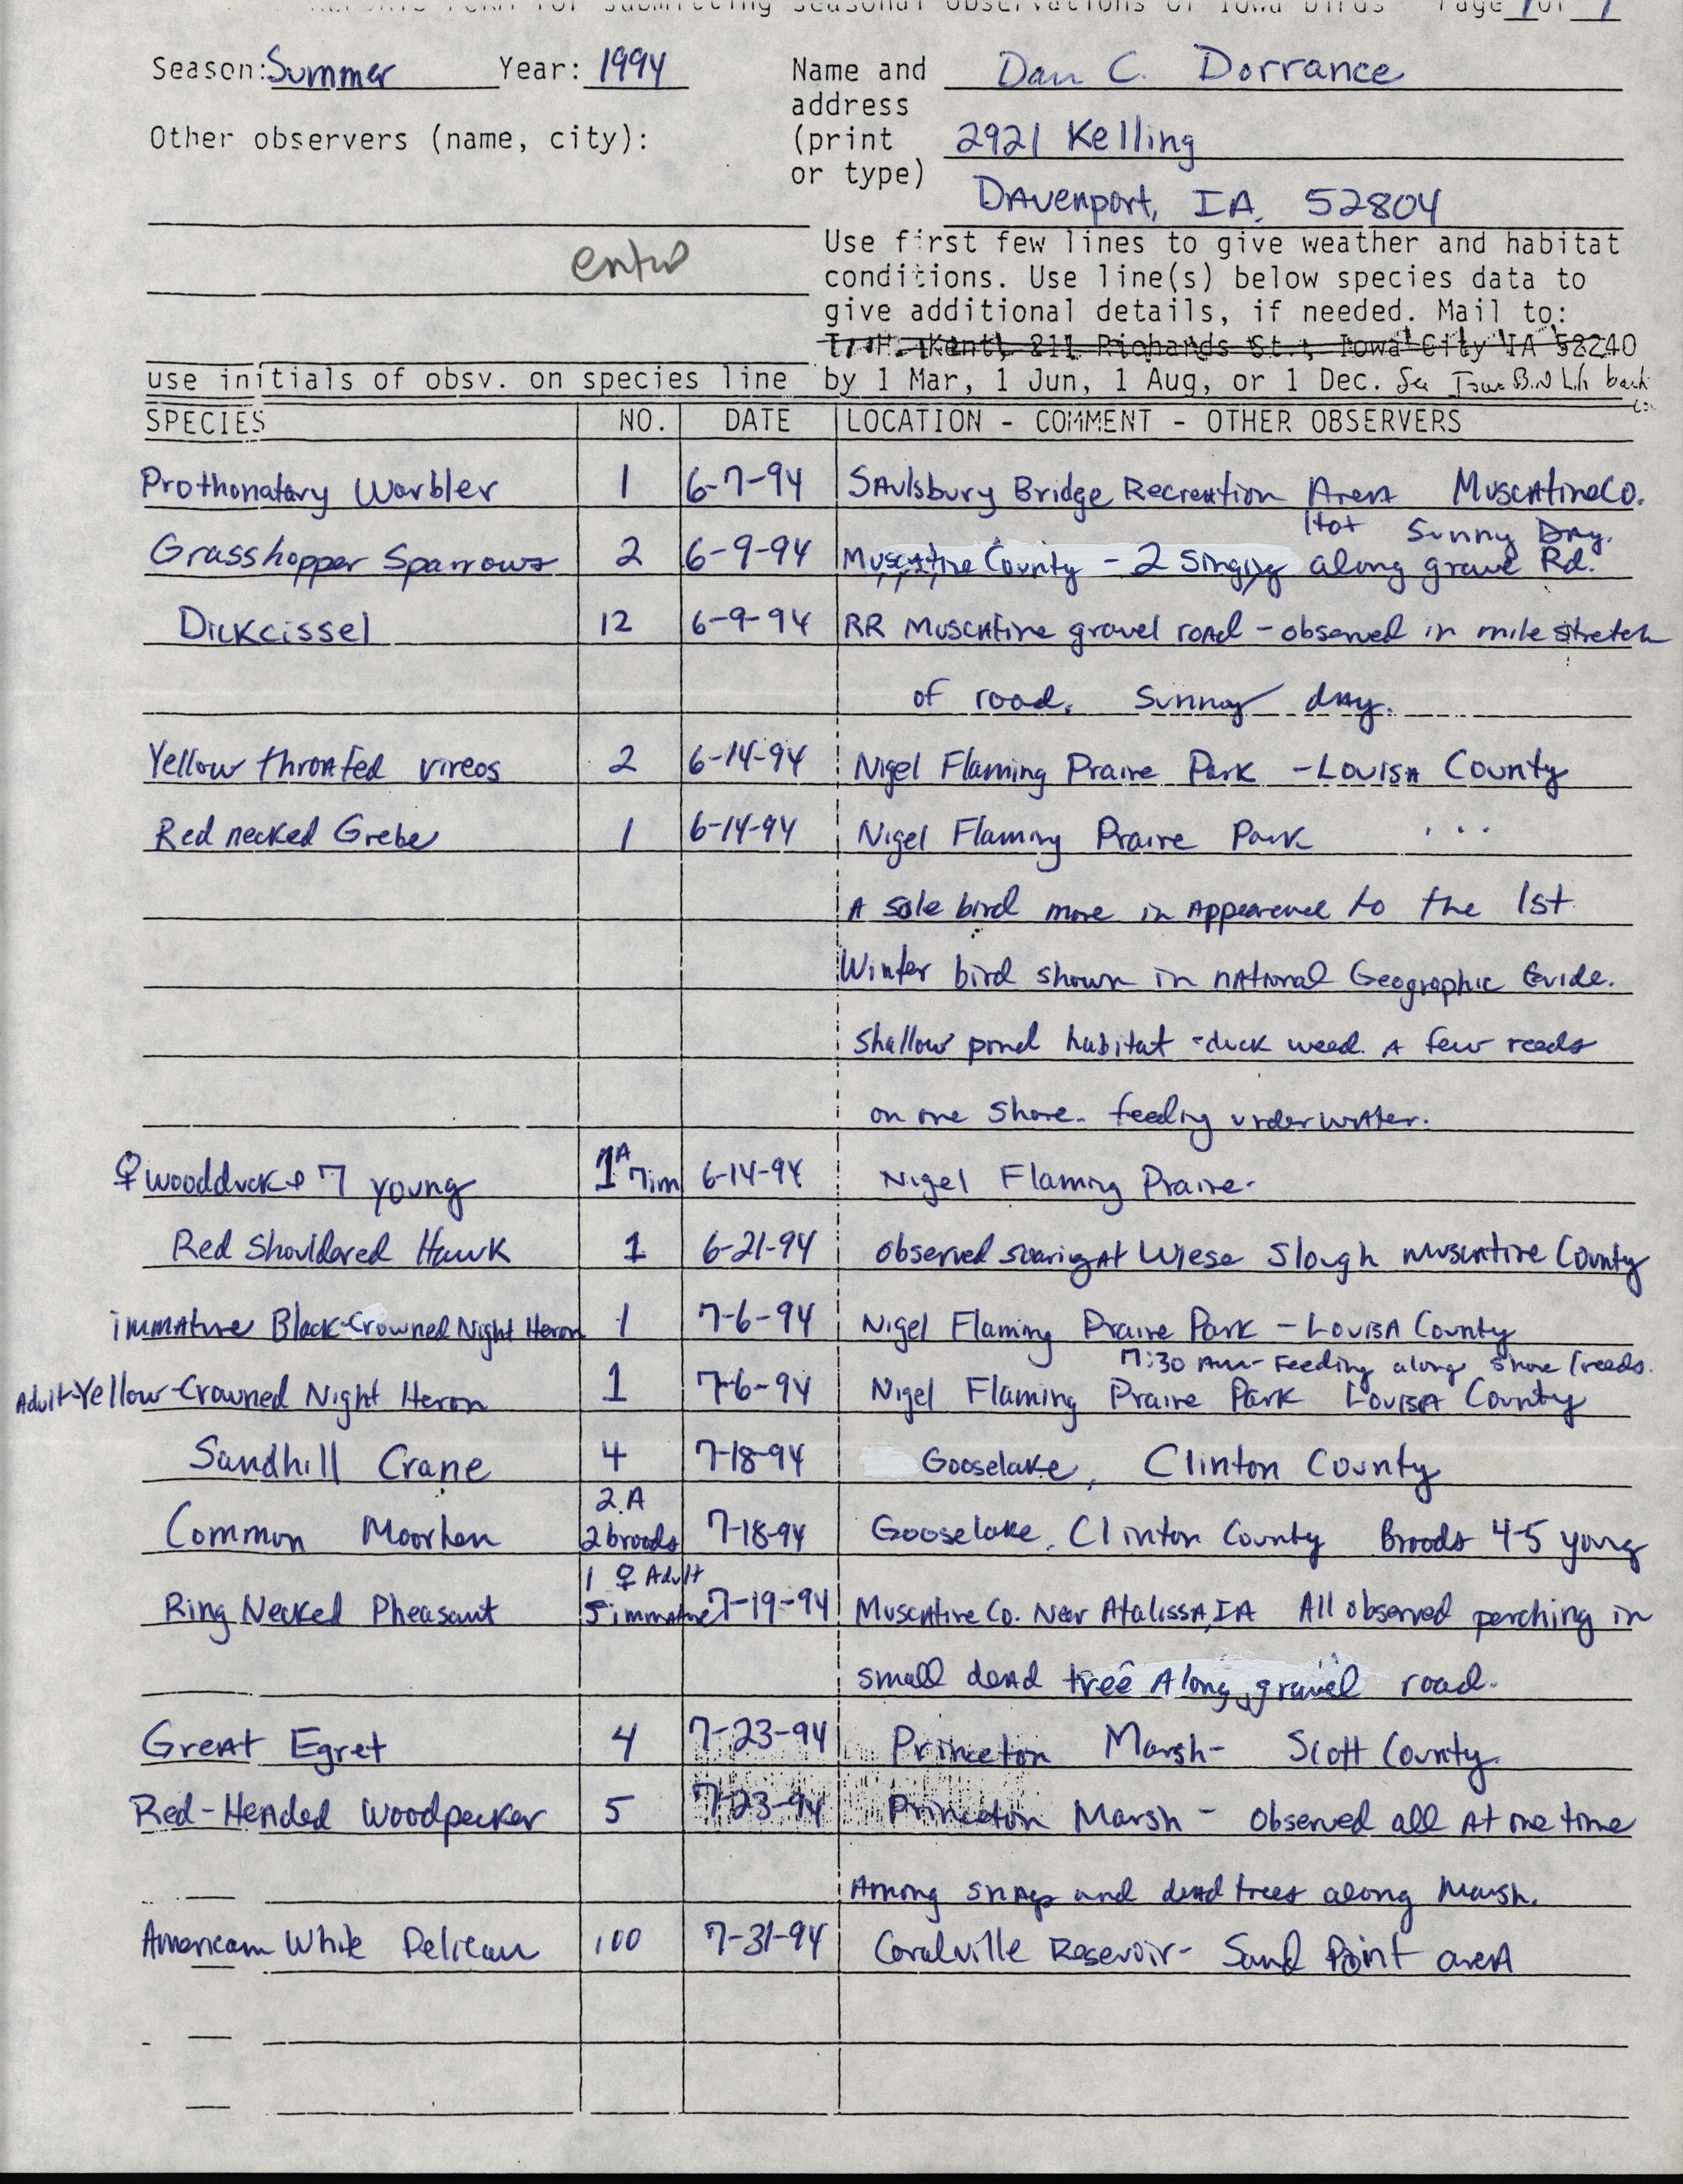 Field reports form for submitting seasonal observations of Iowa birds, Dan Dorrance, Summer 1994